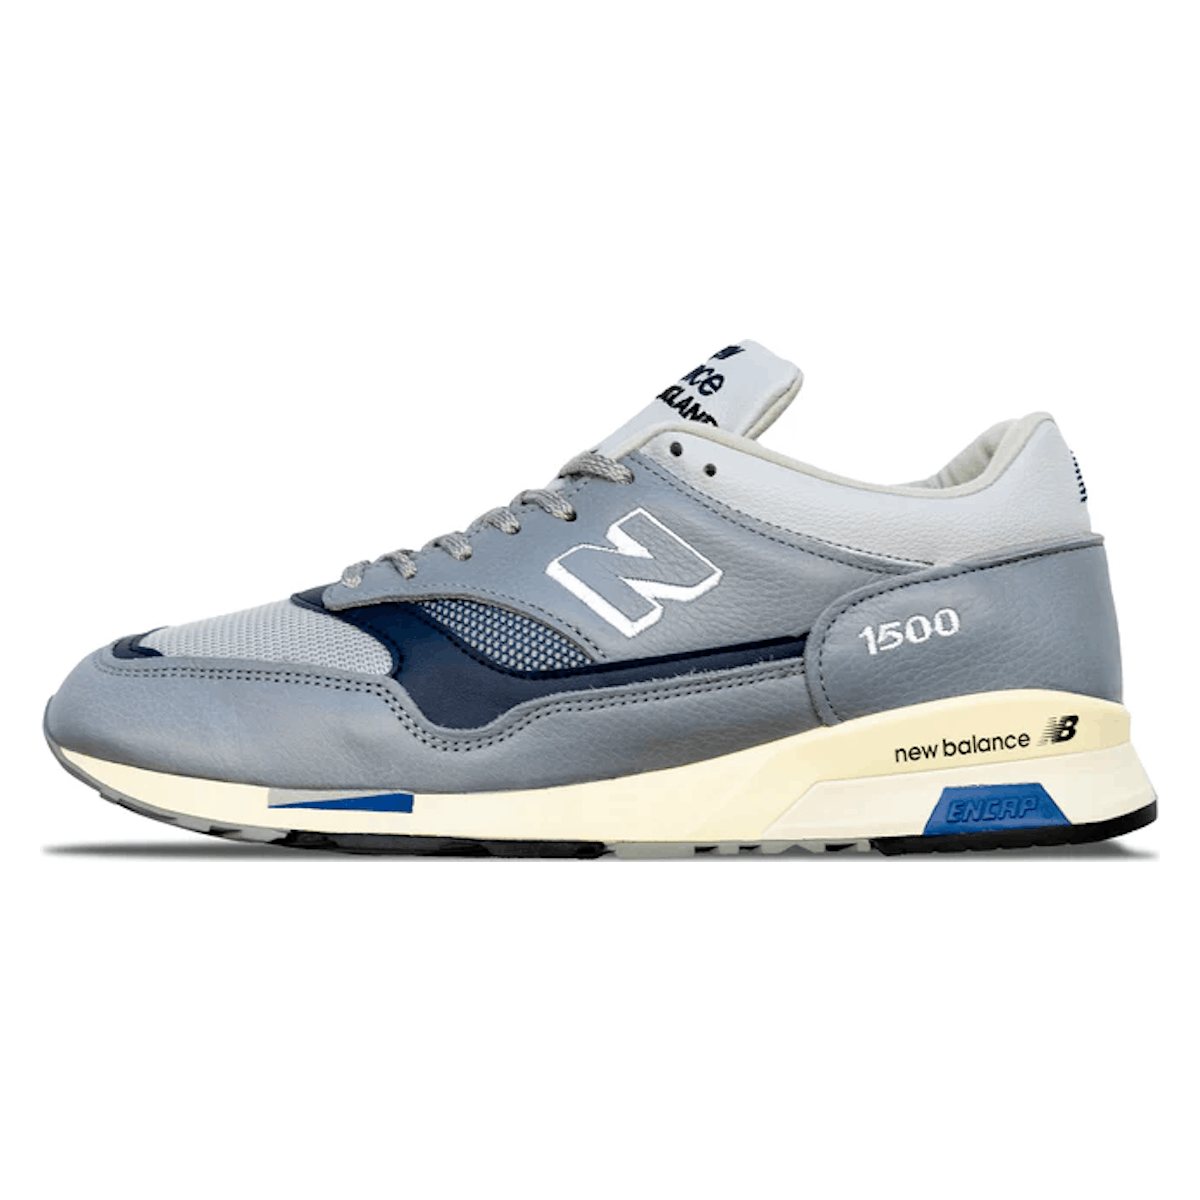 New Balance M1500 Made In England "A Love Letter To Flimby"